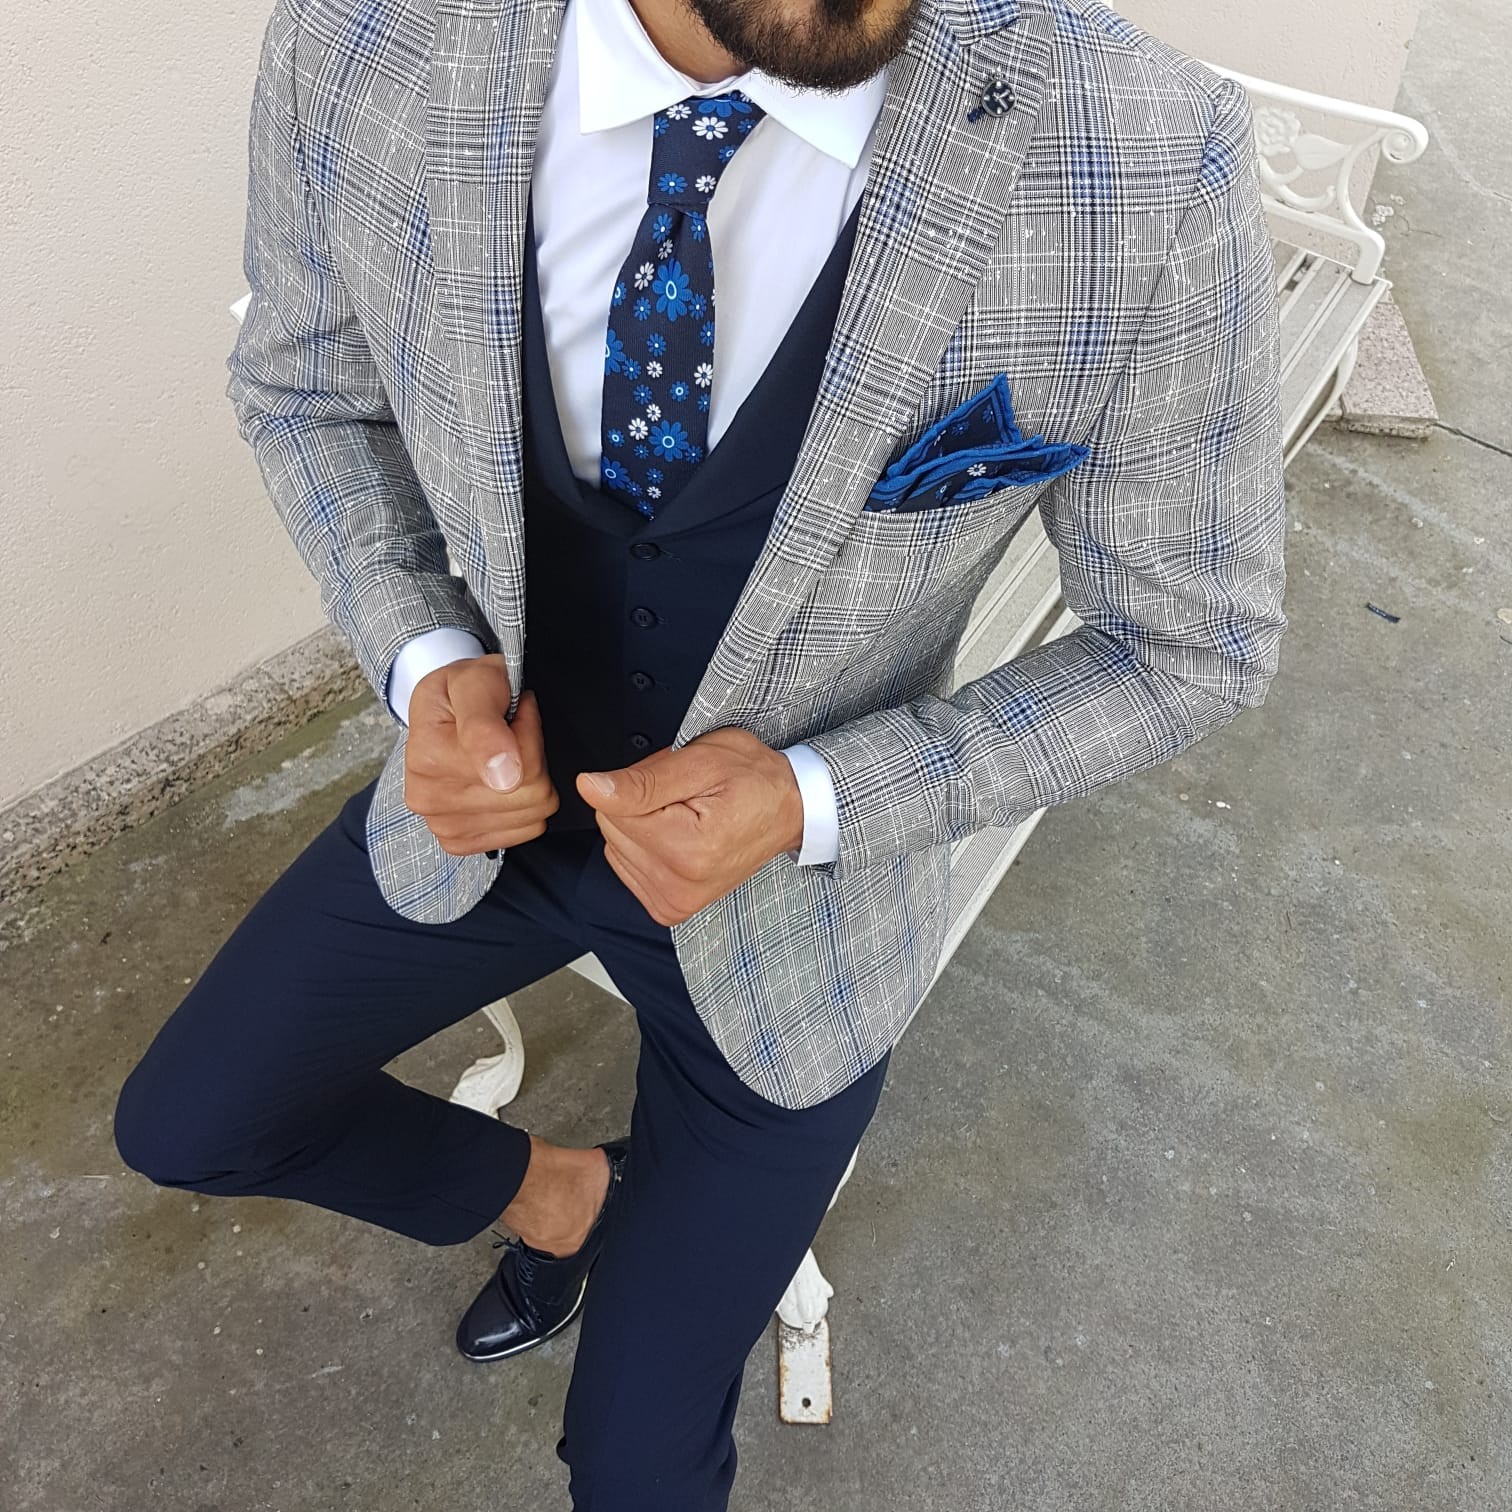 Buy Navy Blue Slim Fit Plaid Suit by Gentwith.com with Free Shipping